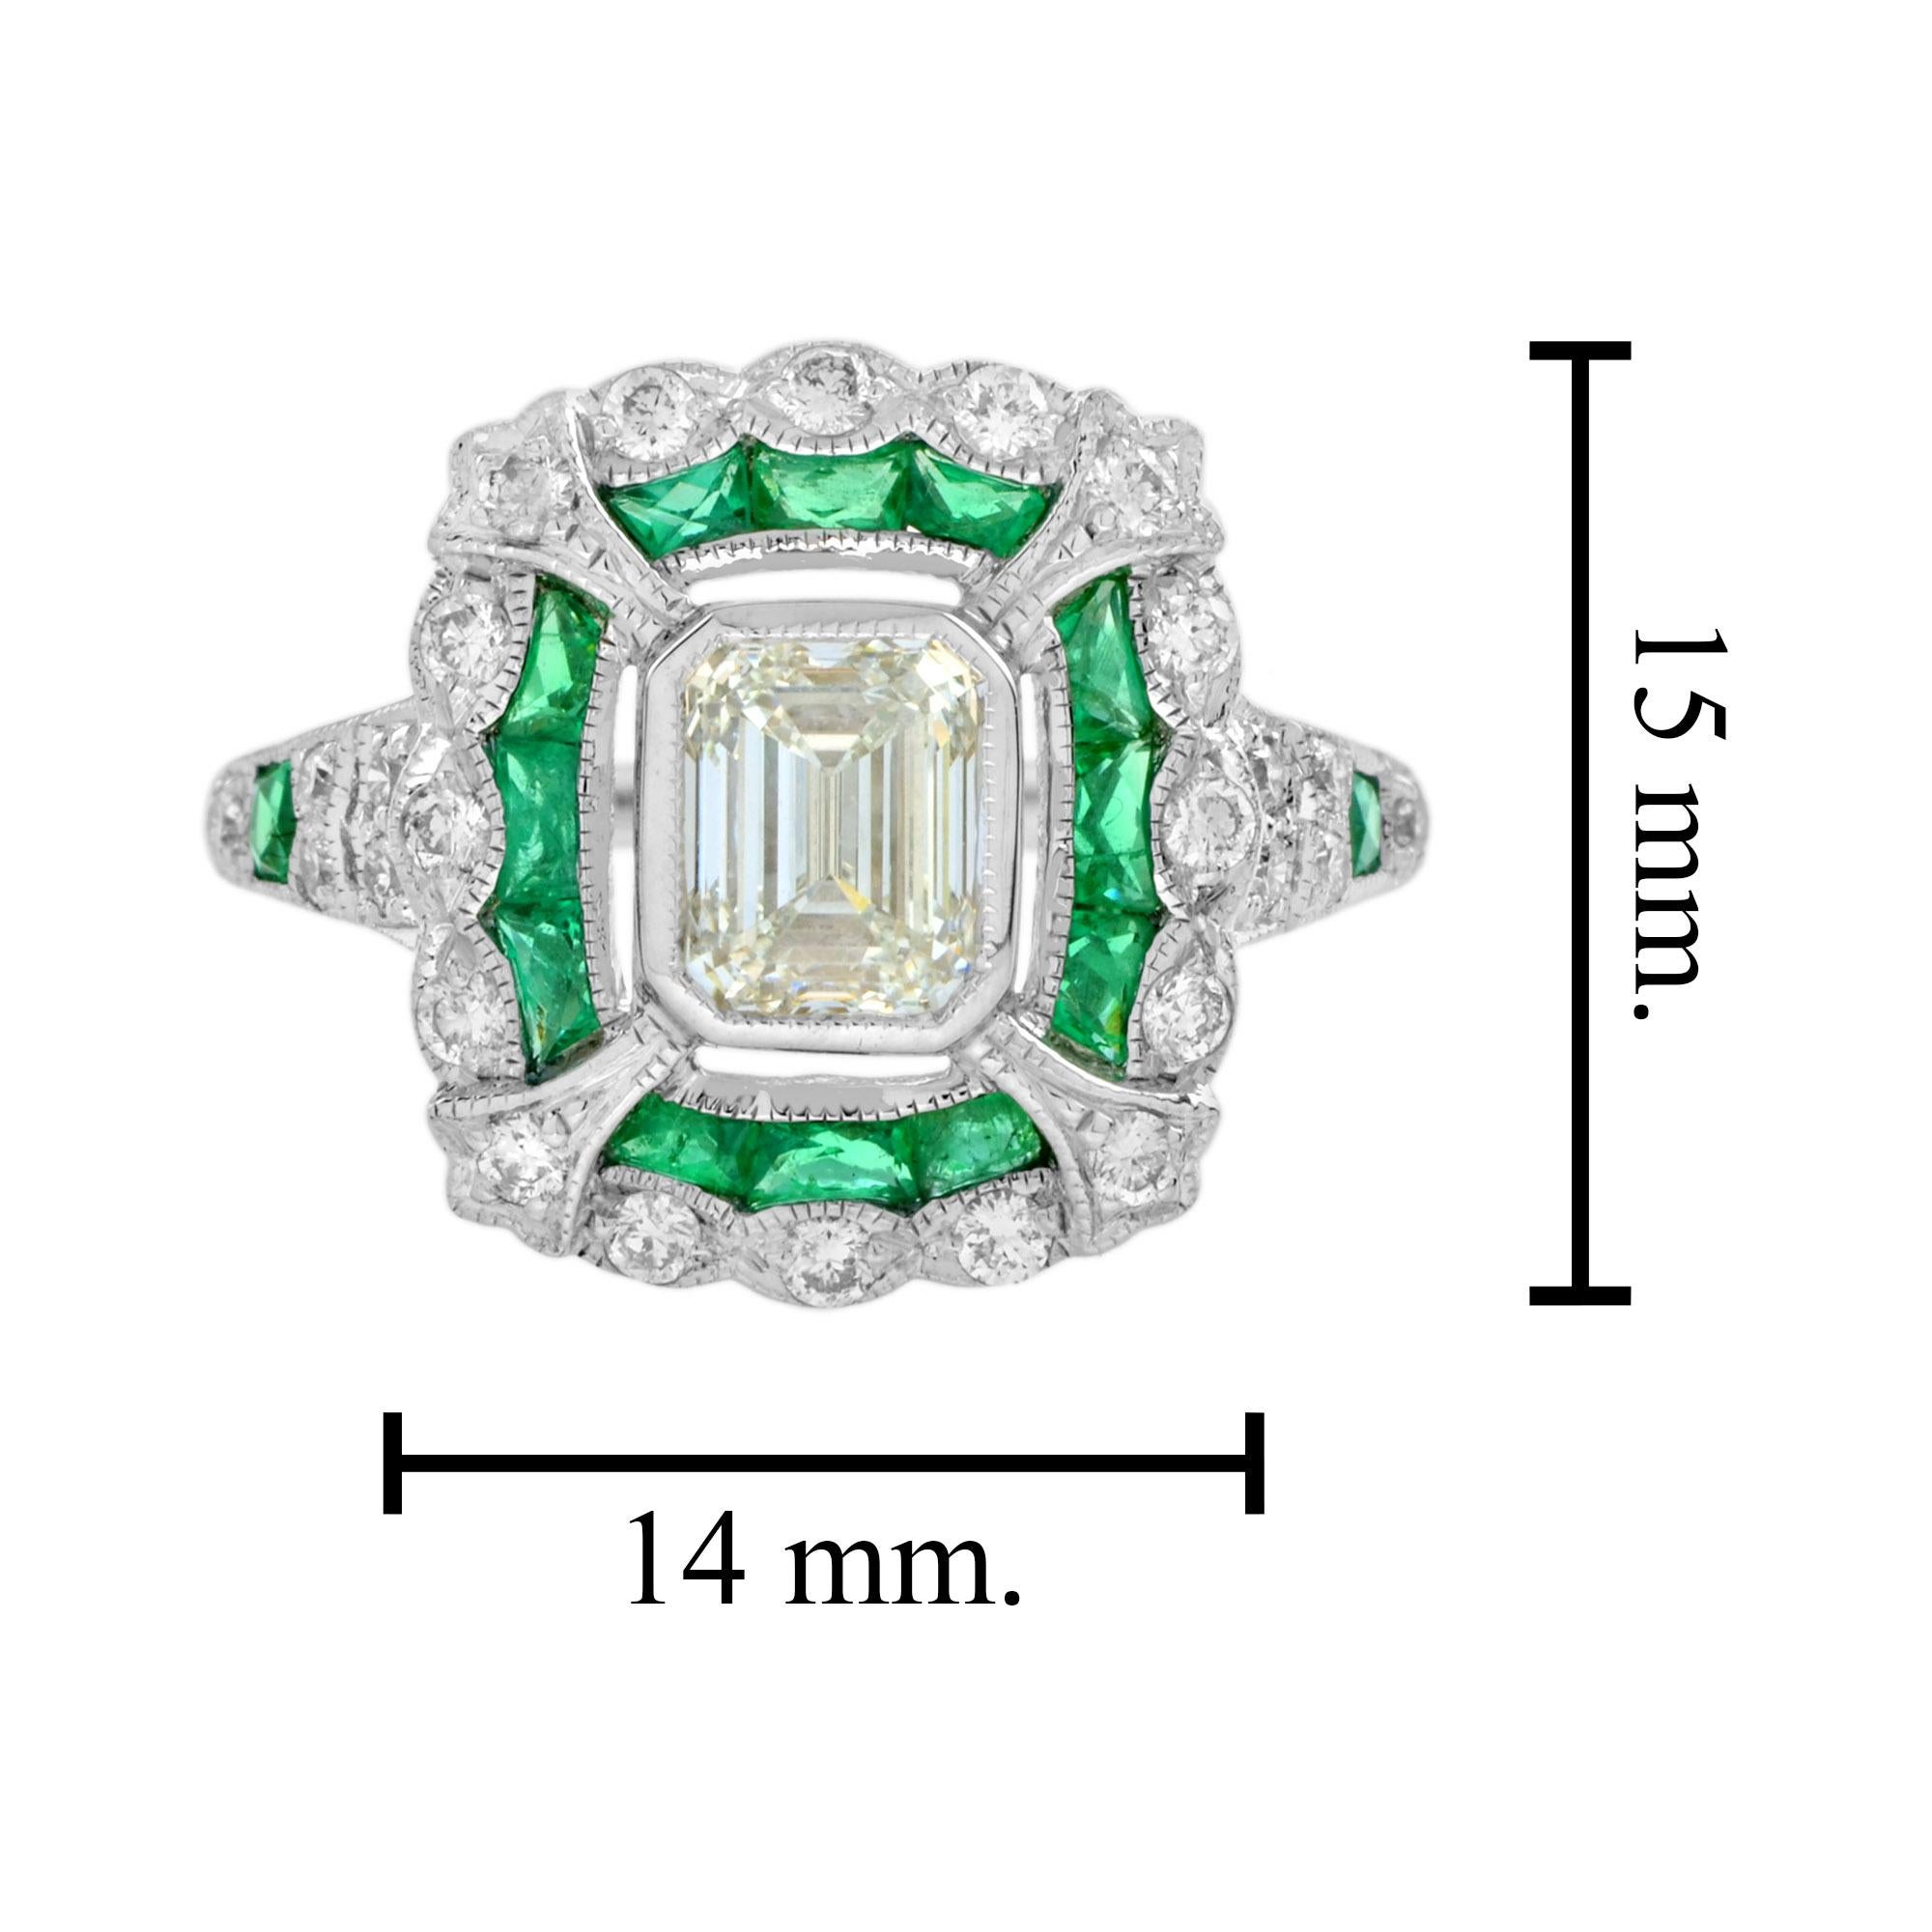 GIA Emerald Cut Diamond Emerald Art Deco Style Engagement Ring in 18k Gold For Sale 4